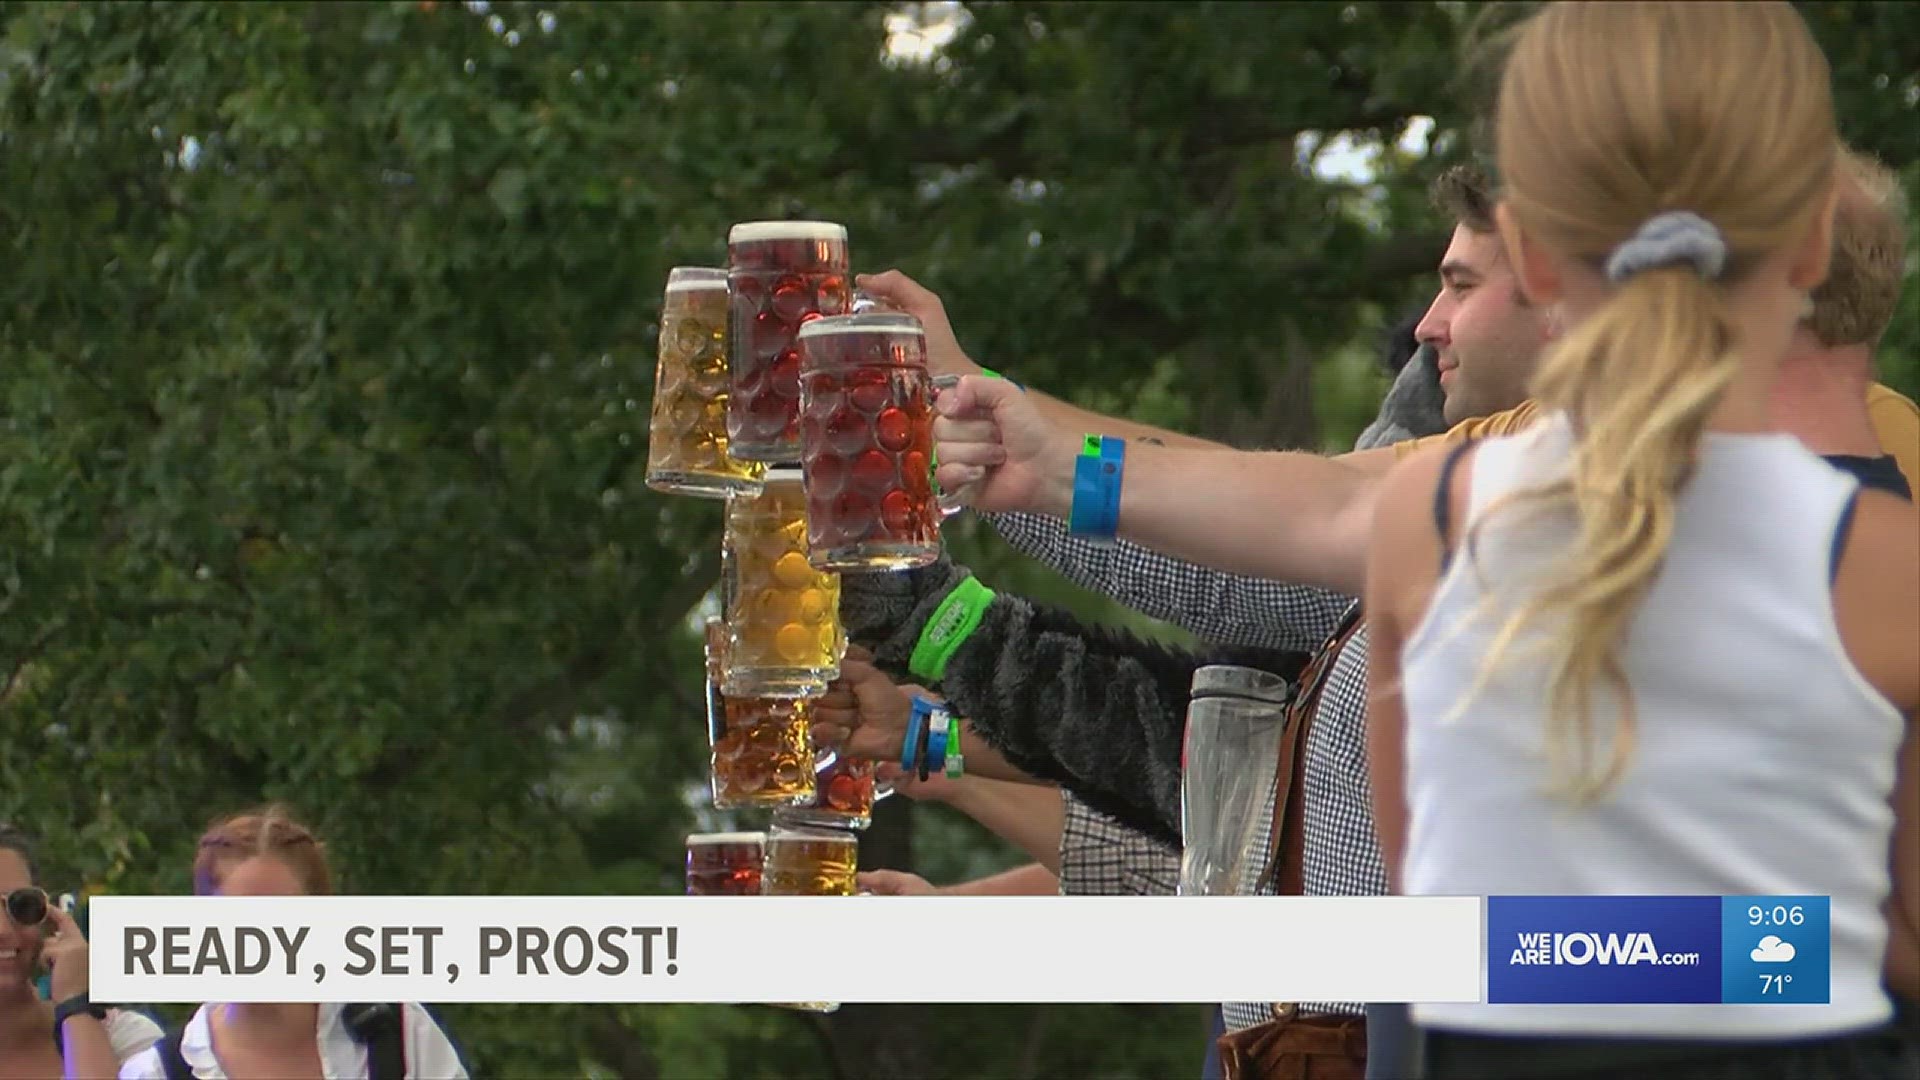 Iowans celebrated Oktoberfest traditions in true German style on Saturday at Water Works Park.